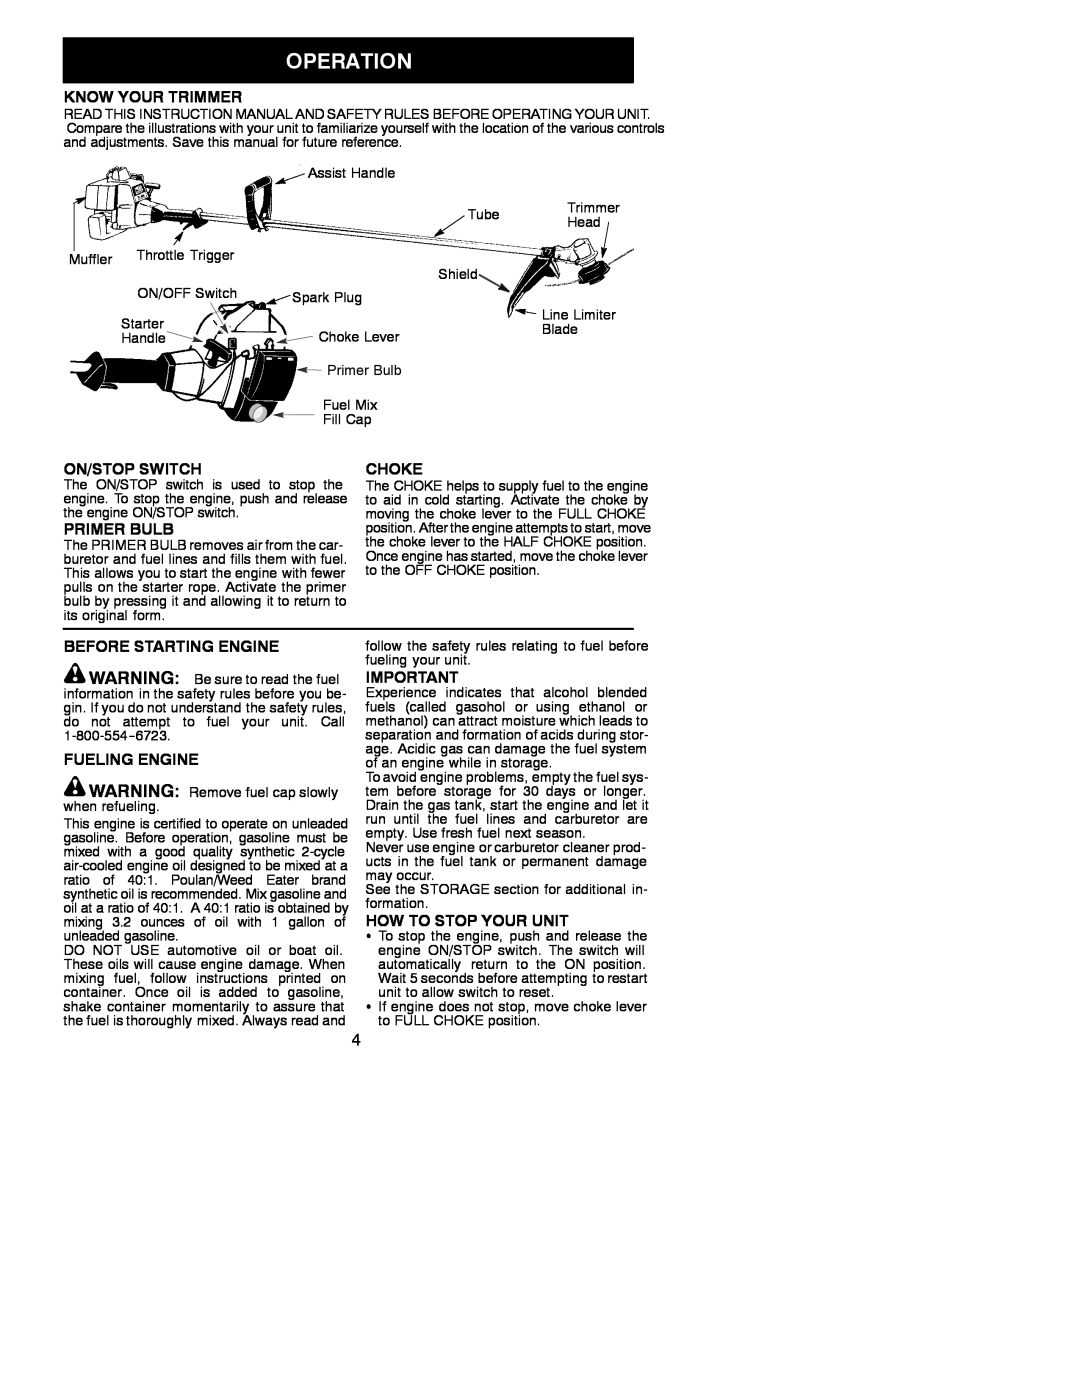 Poulan PL500 Know Your Trimmer, On/Stop Switch, Primer Bulb, Choke, Before Starting Engine, Fueling Engine 